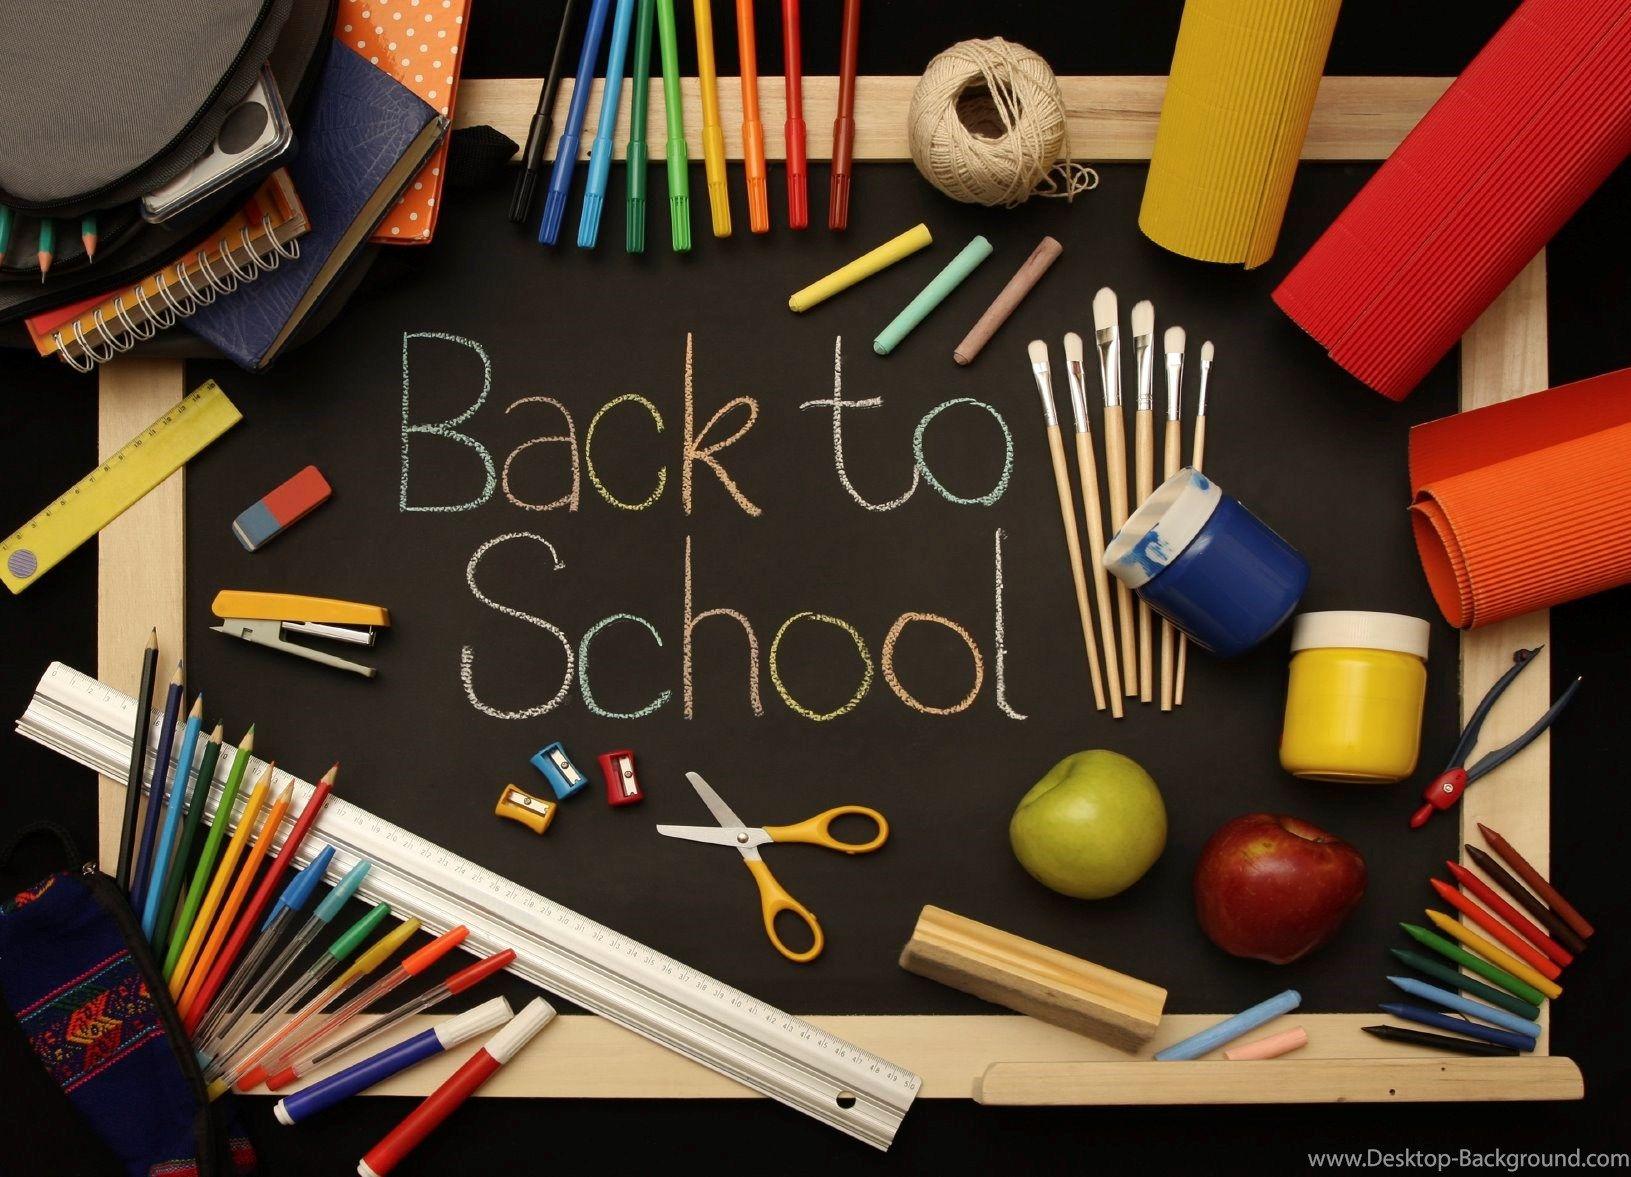 Wallpapers Hd Back To School Wallpaper Cave